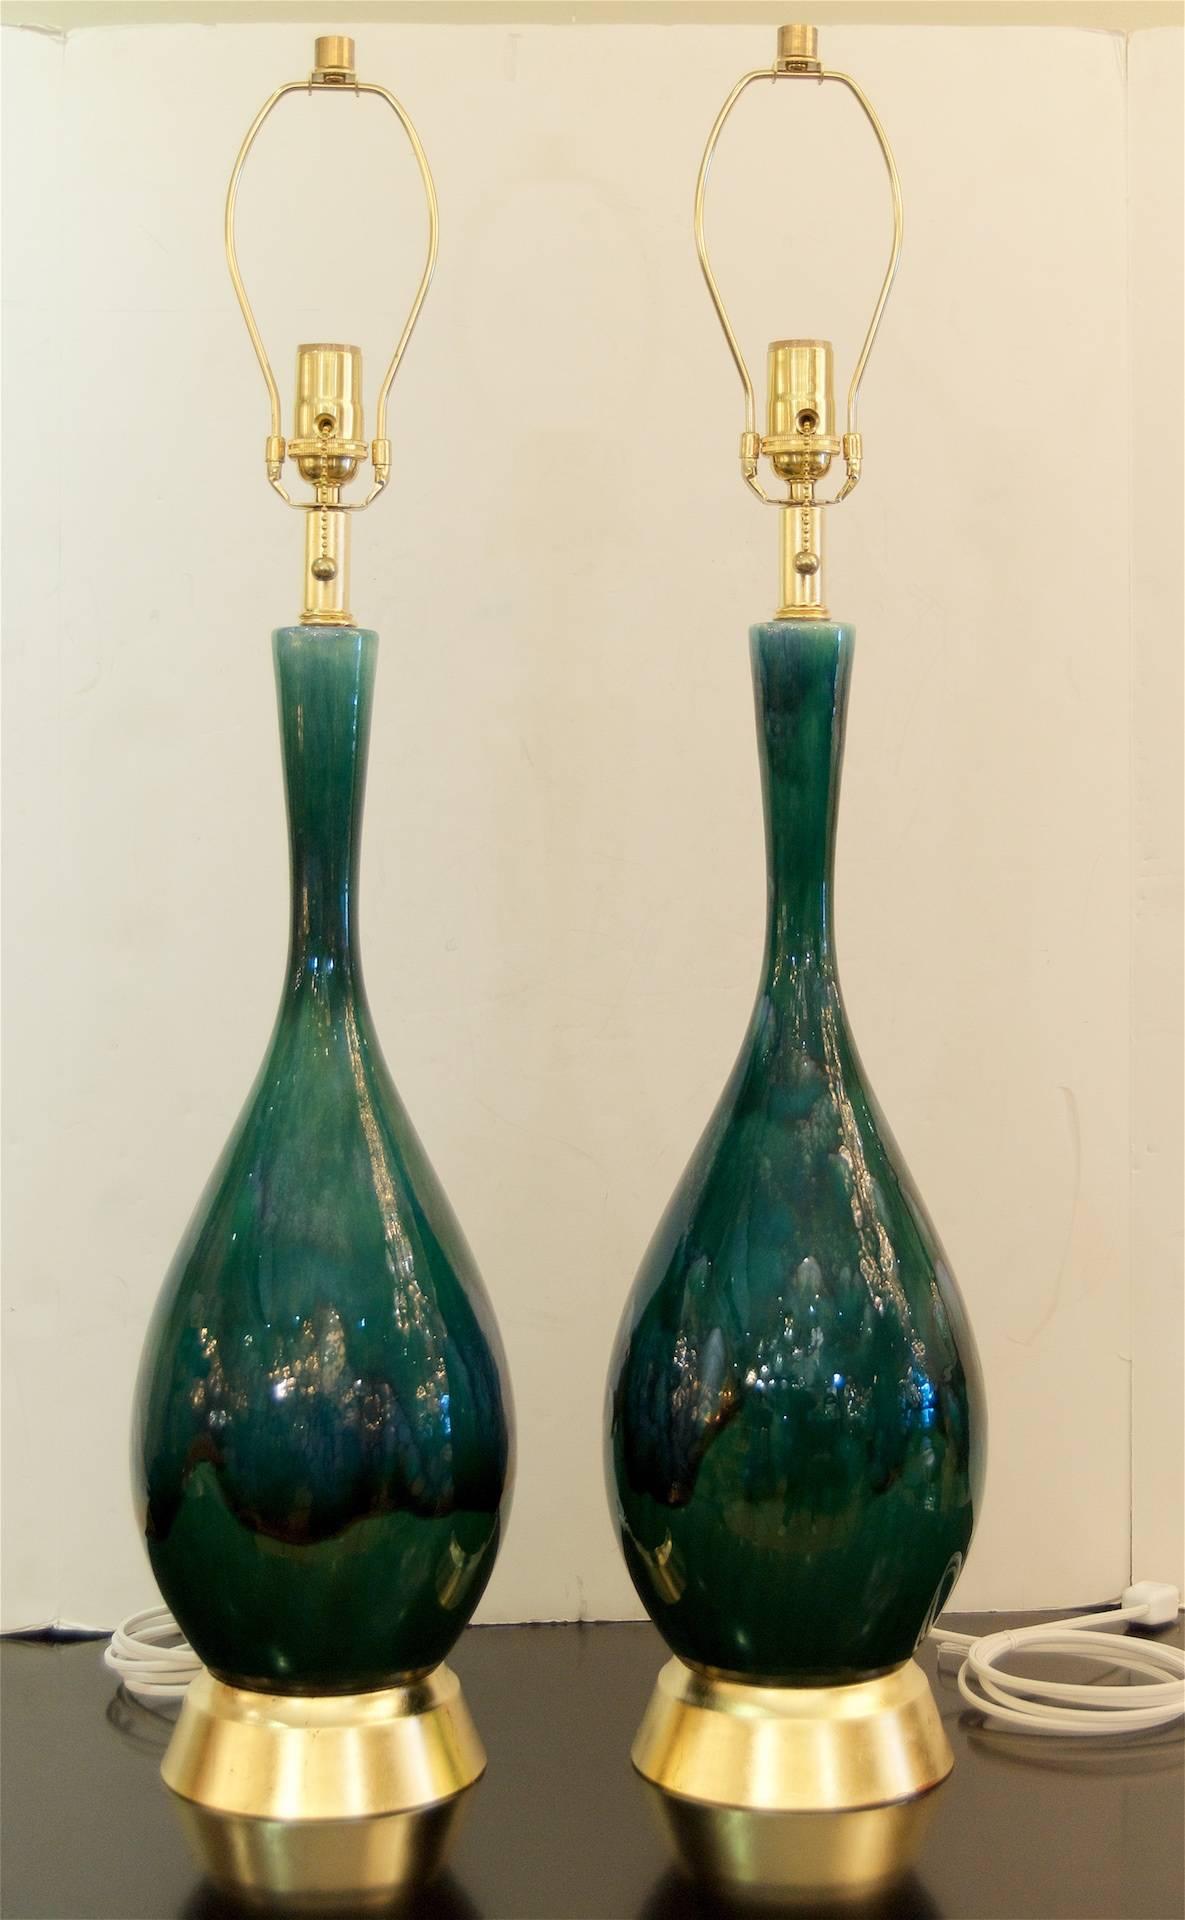 Excellent pair of midcentury drip glaze lamps in blue and green tones, with particularly excellent variegation to the glaze and pleasing craquelure, believed to be Royal Haeger. Hardware newly gilt.

New wiring. Height listed is with 8